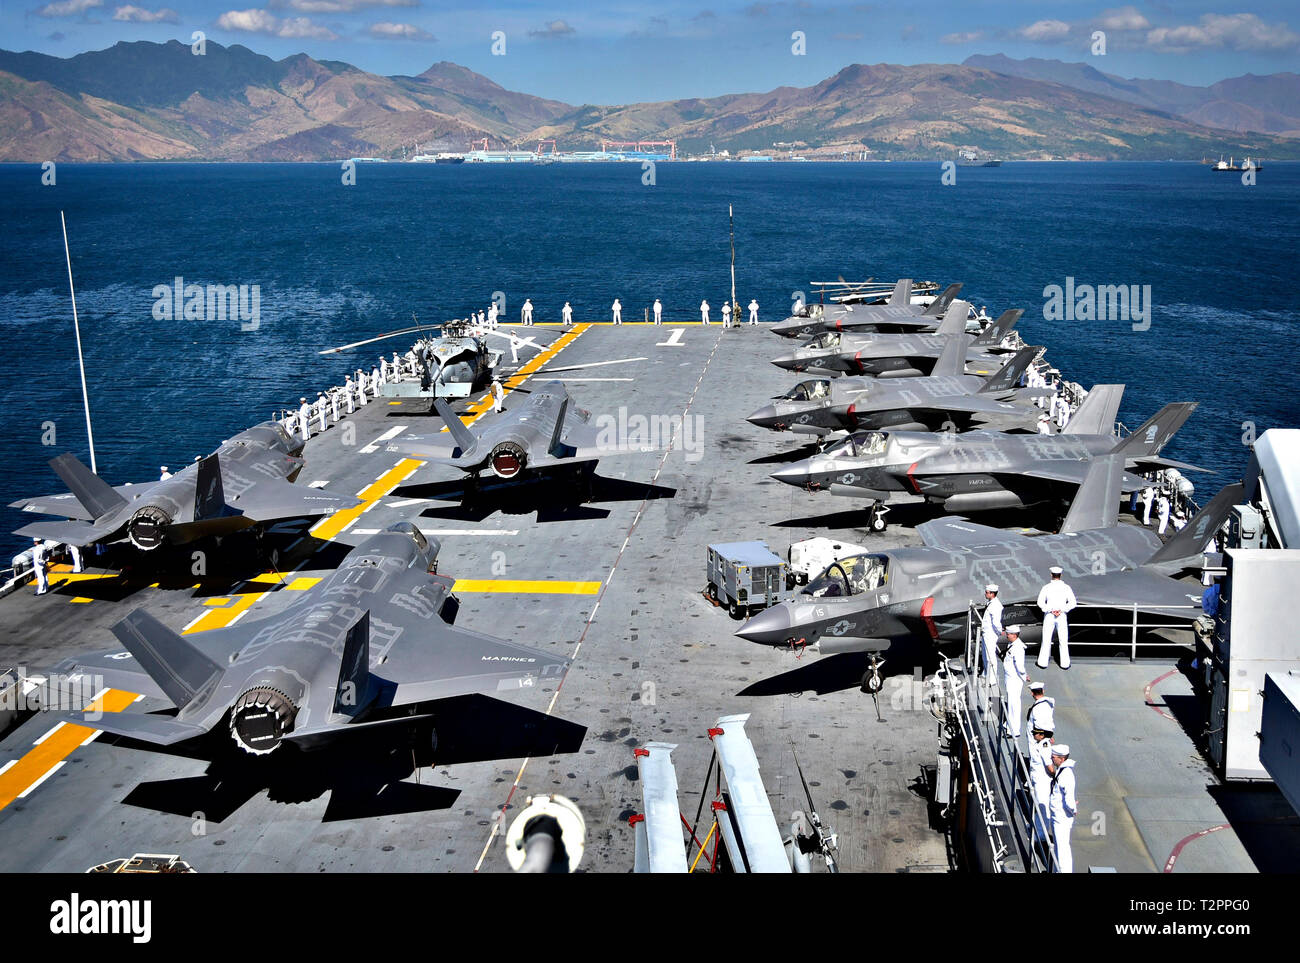 190402-N-RI884-0096 SUBIC BAY, Philippines (April 2, 2019) F-35B Lightning II aircraft, assigned to Marine Fighter Attack Squadron (VMFA) 121, are secured to the flight deck as Sailors man the rails aboard the amphibious assault ship USS Wasp (LHD 1) while departing in support of Exercise Balikatan 2019. Exercise Balikatan, in its 35th iteration, is an annual U.S., Philippine military training exercise focused on a variety of missions, including humanitarian assistance and disaster relief, counter-terrorism, and other combined military operations. (U.S. Navy photo by Mass Communication Special Stock Photo